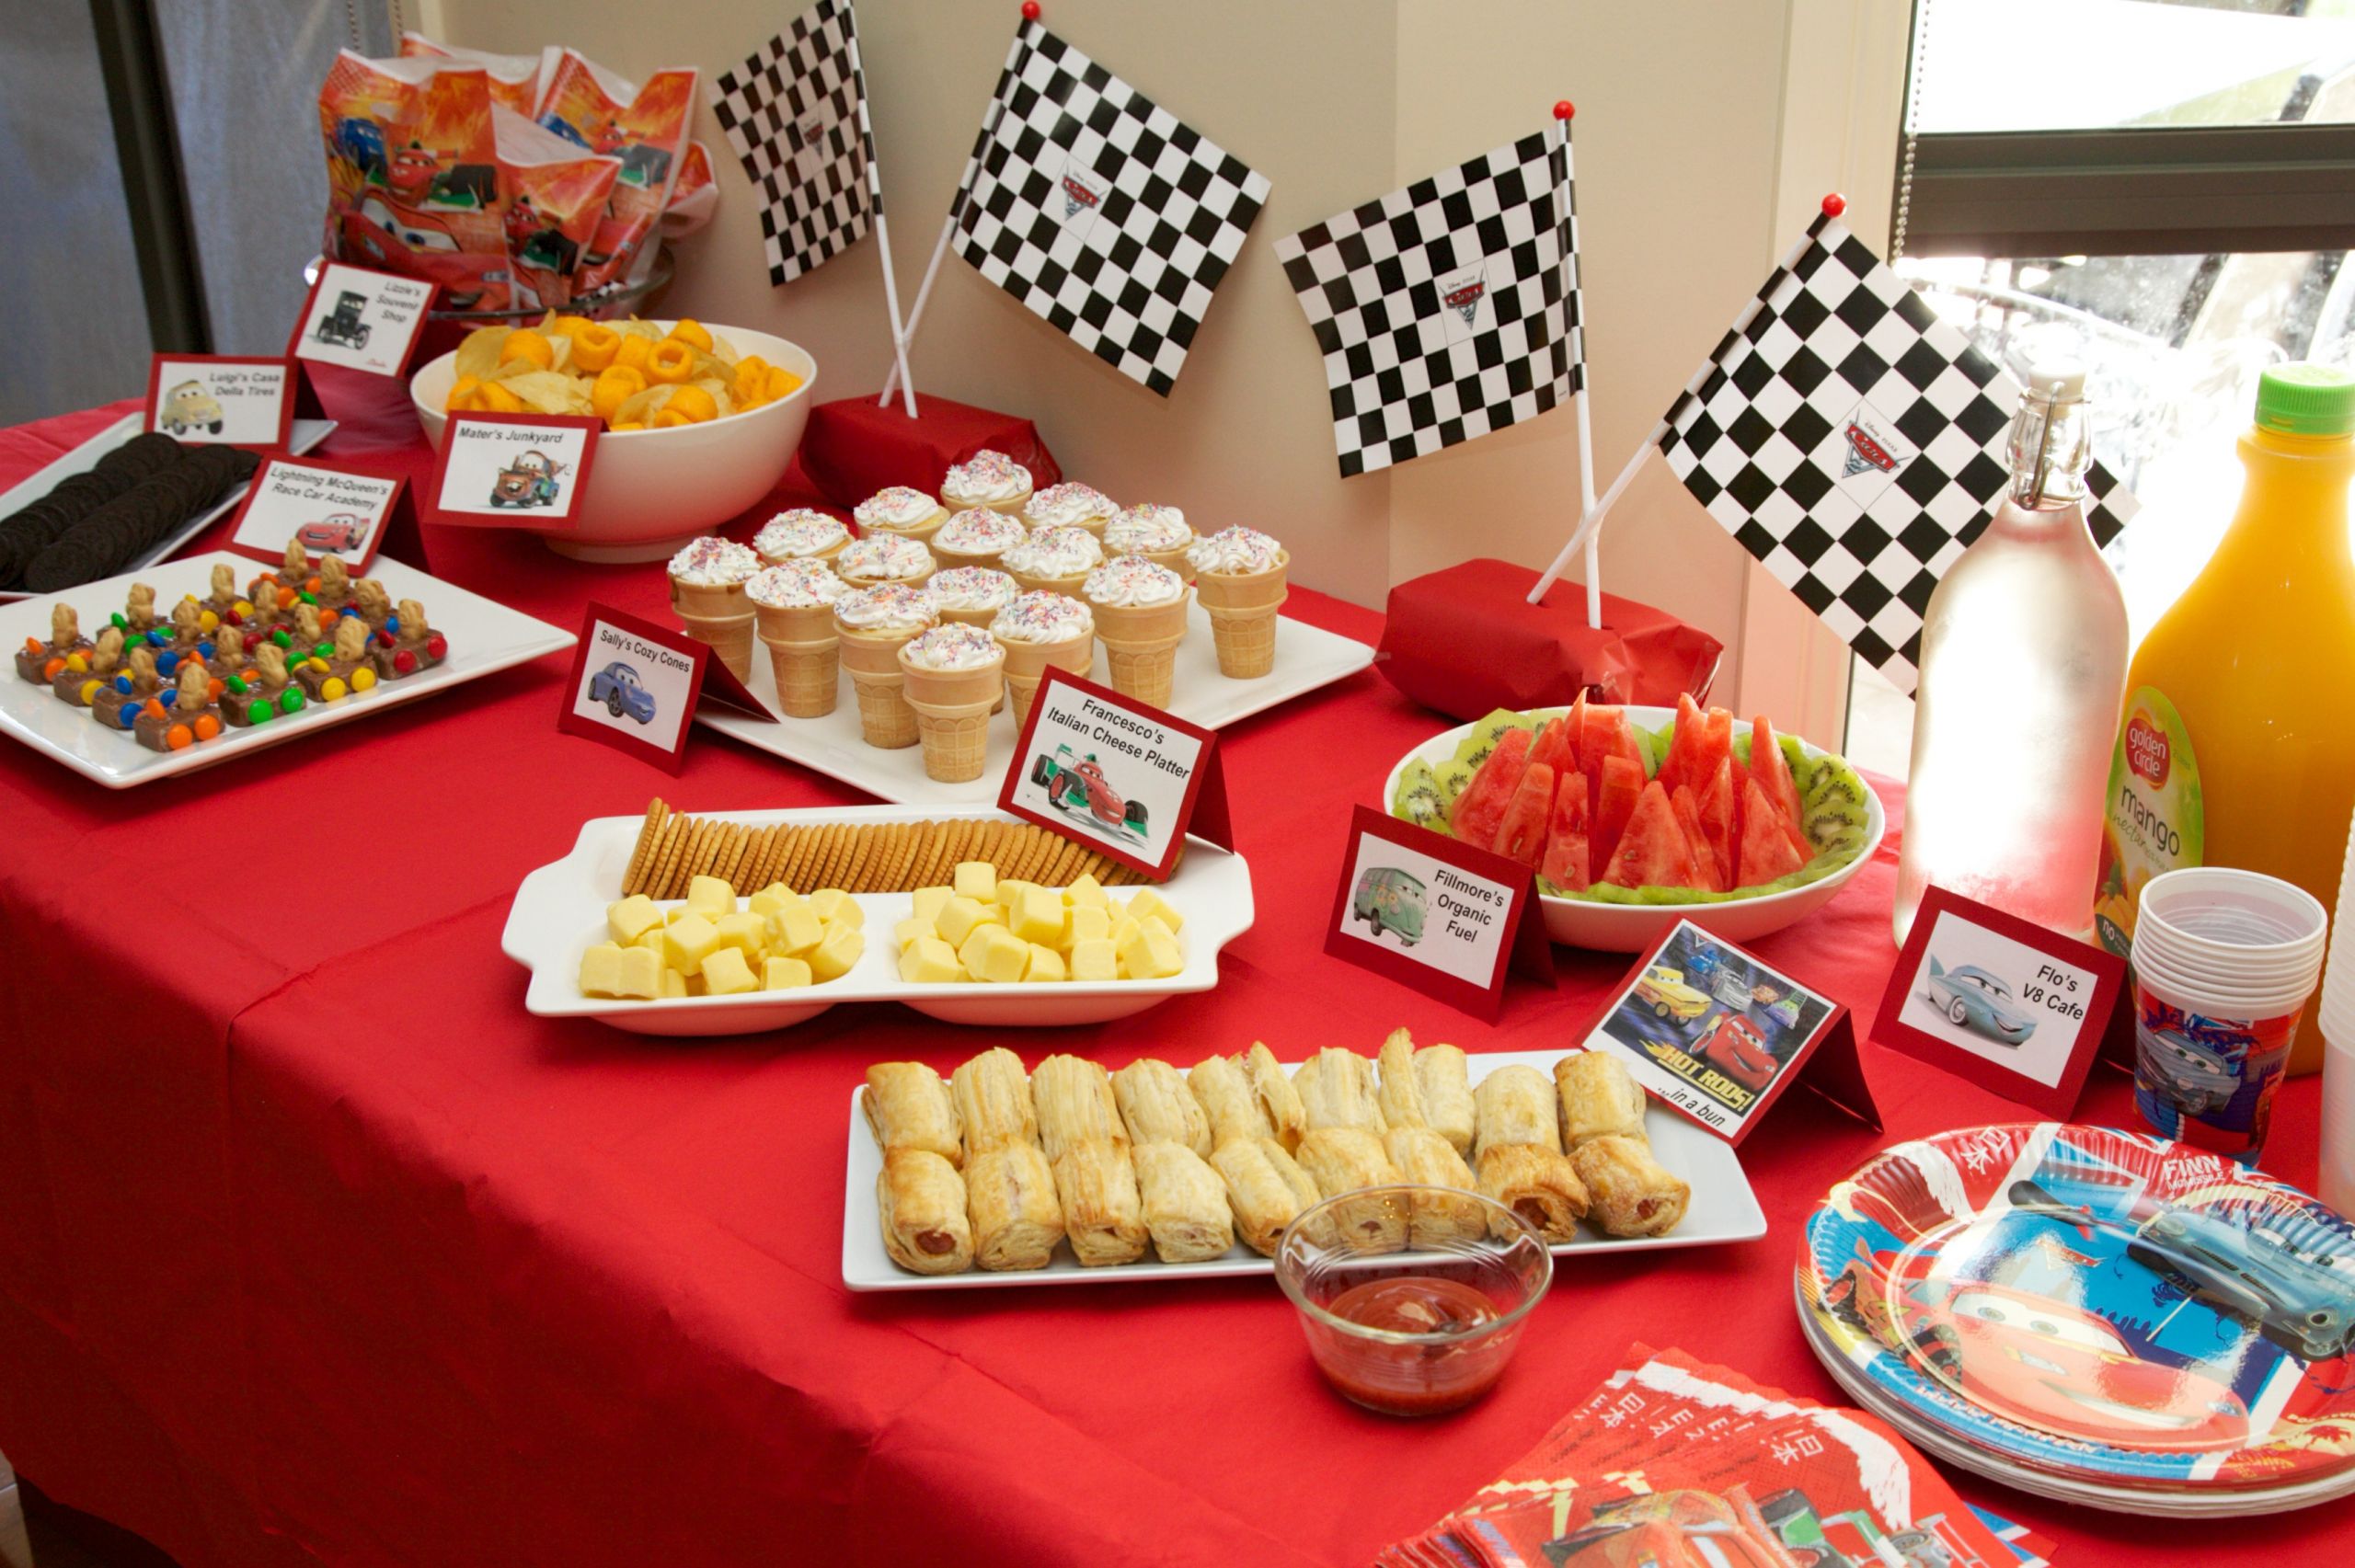 Toddler Bday Party Food Ideas
 How to throw a BIG kids birthday party on a small bud